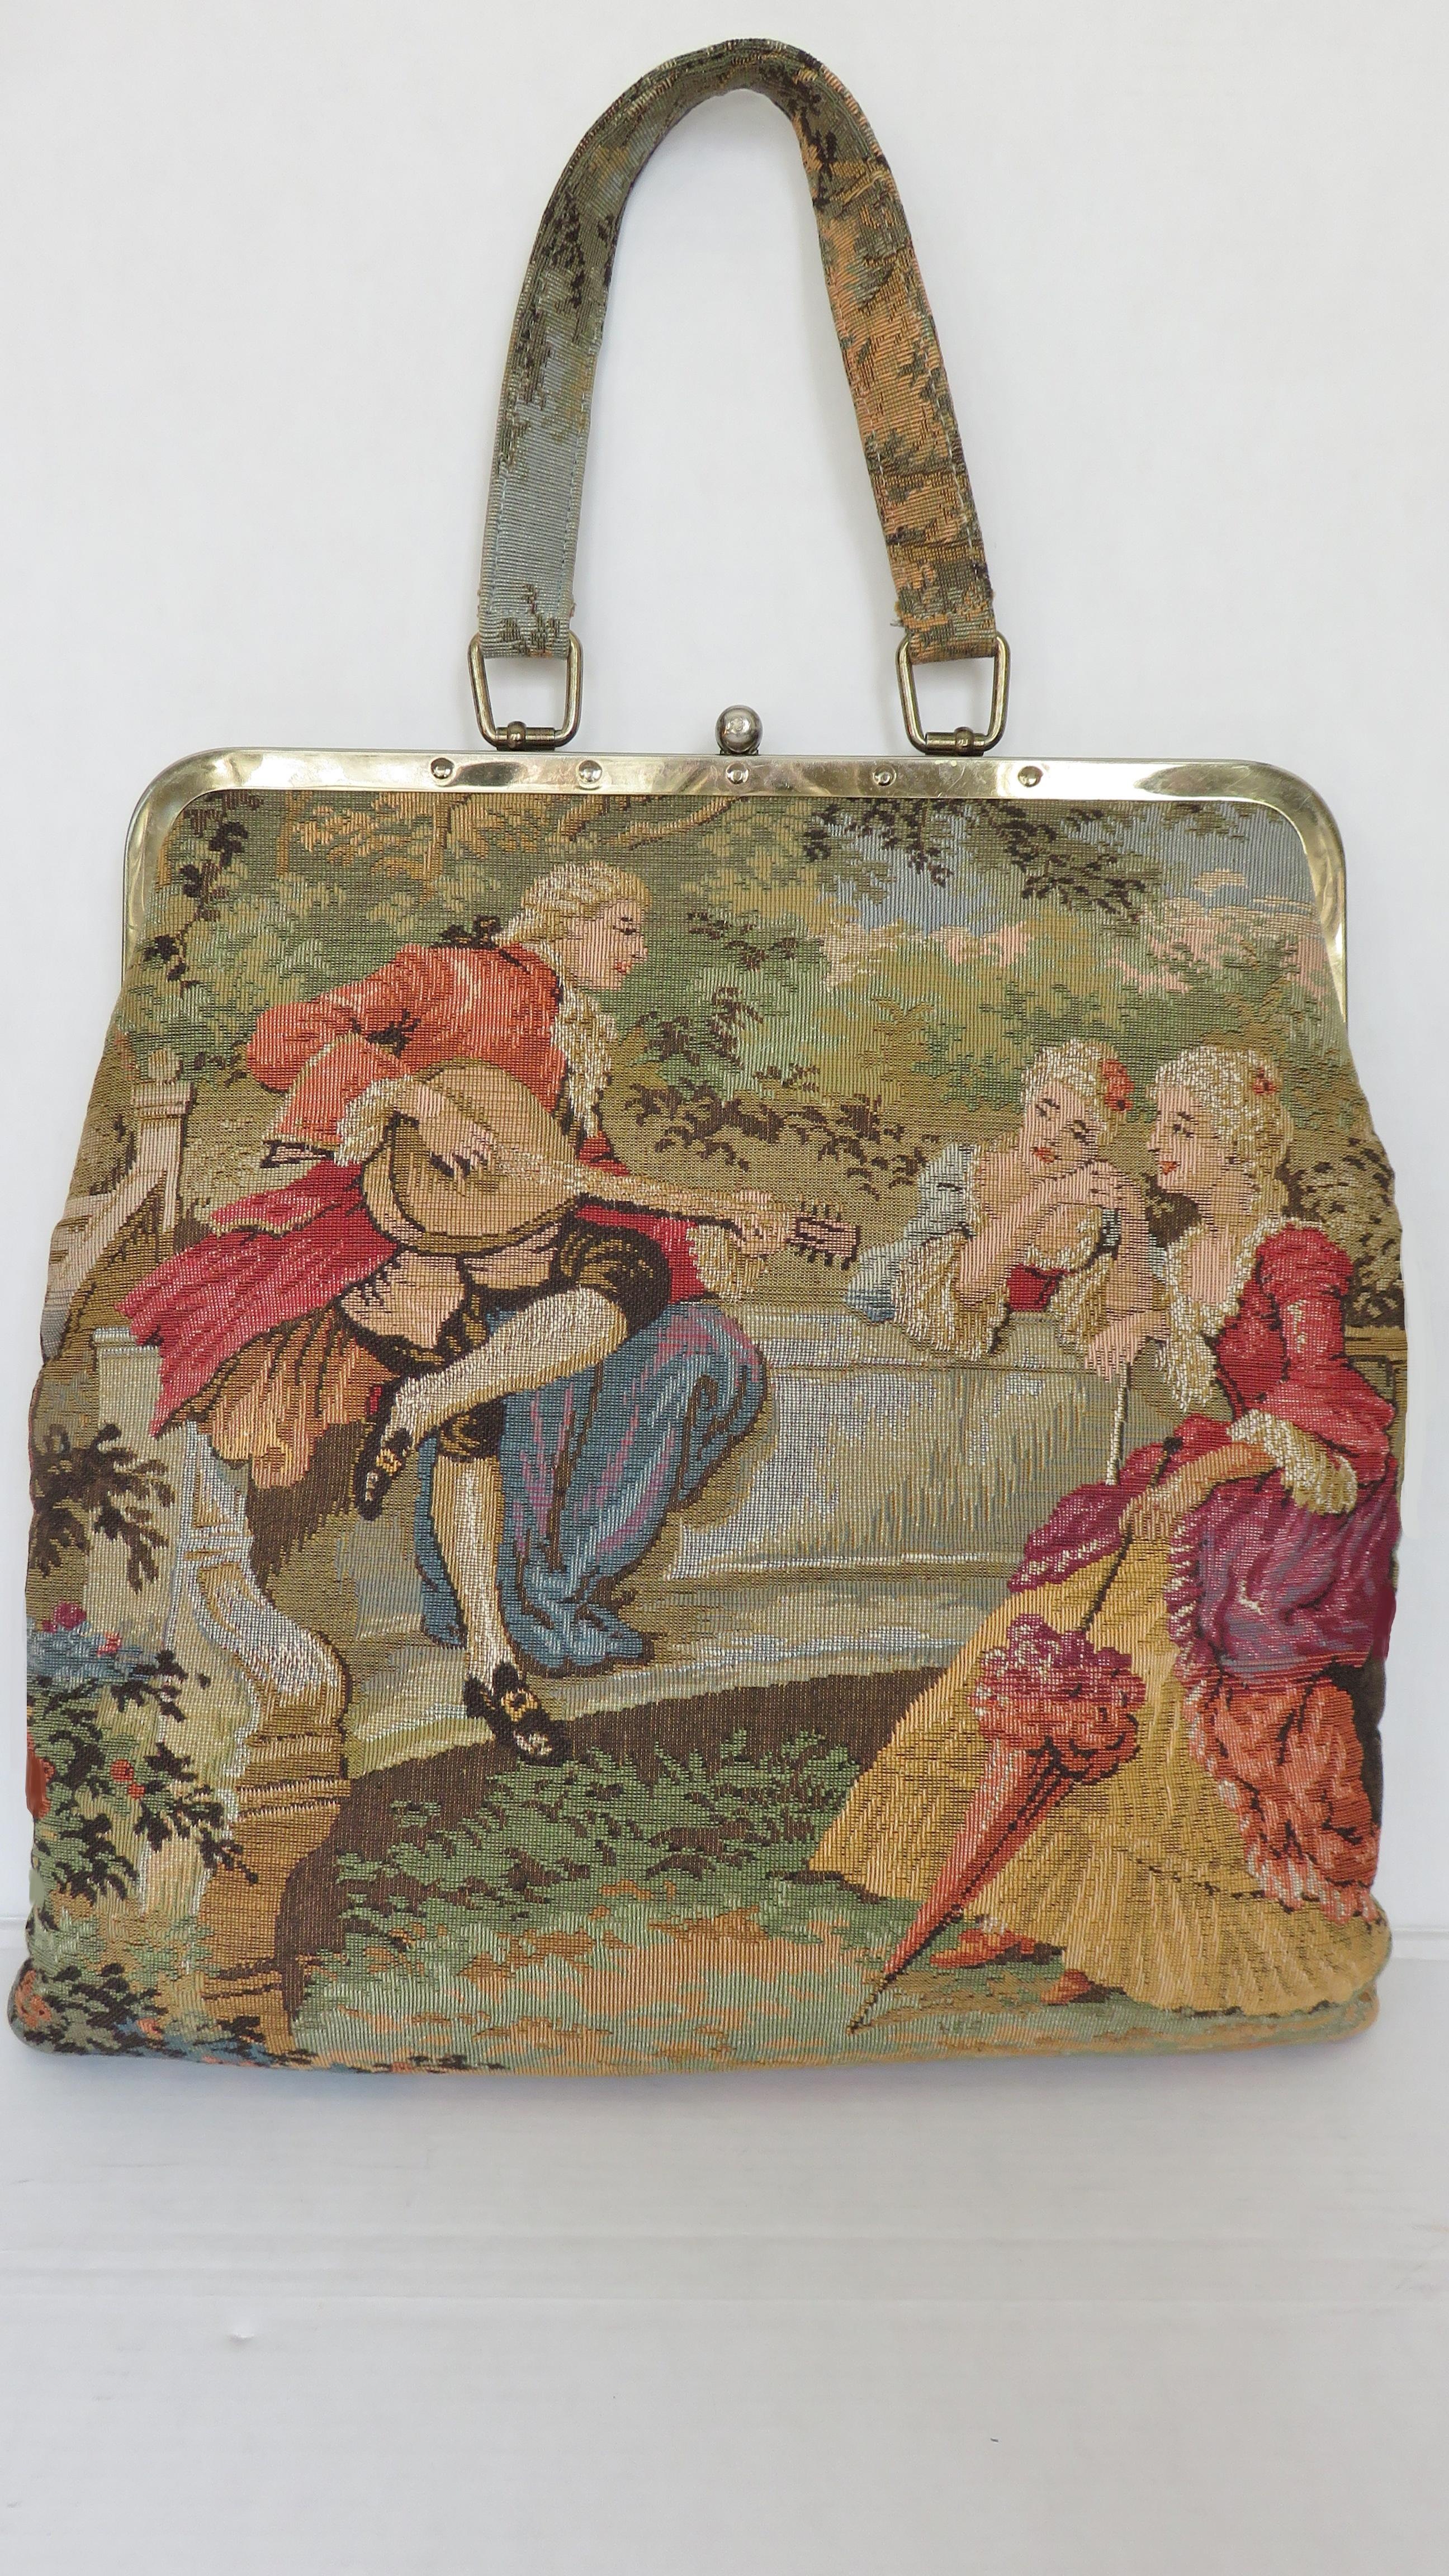 A great large tapestry handbag from JR Julius Resnick.  It has a top handle and a hinged frame with top clasp.  One side is adorned with an 18th century man and woman dancing and on the other a man treating 2 women to an instrumental serenade. The